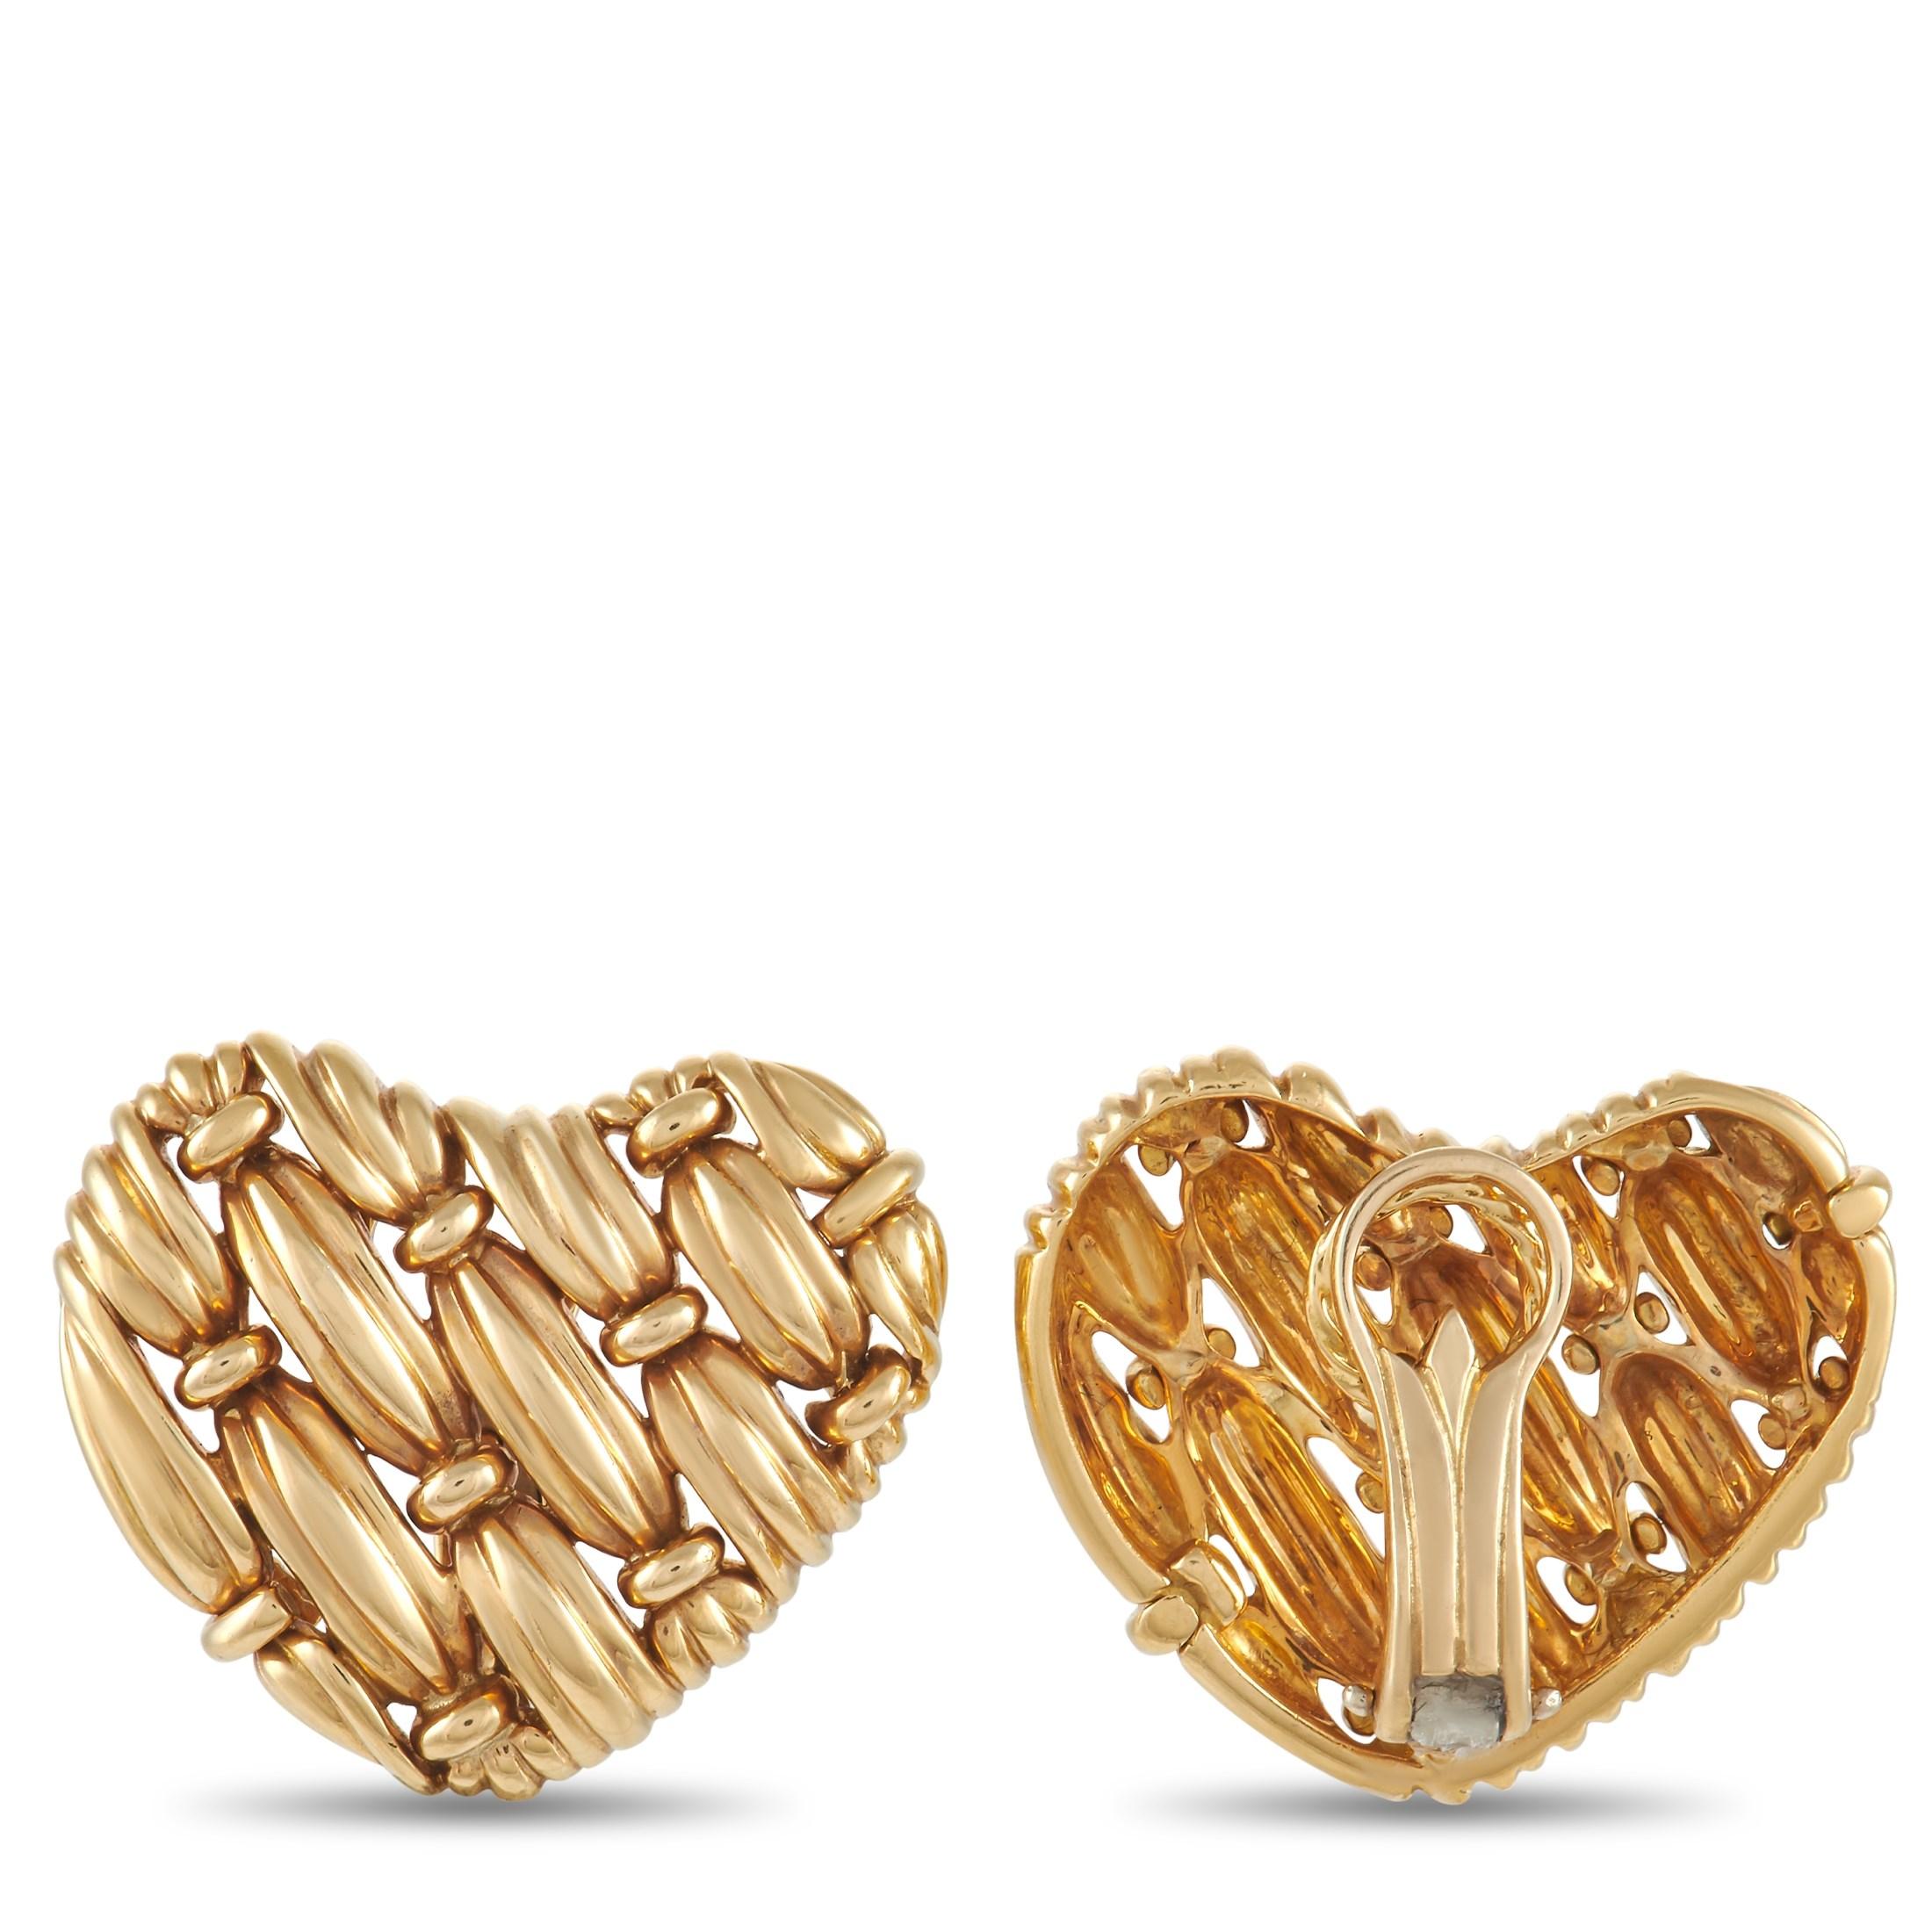 An intricate, textured design makes these heart-shaped earrings from Tiffany & Co. simply exquisite. Crafted from 18K Yellow Gold, each earring measures 0.95” long and 1.0” wide.